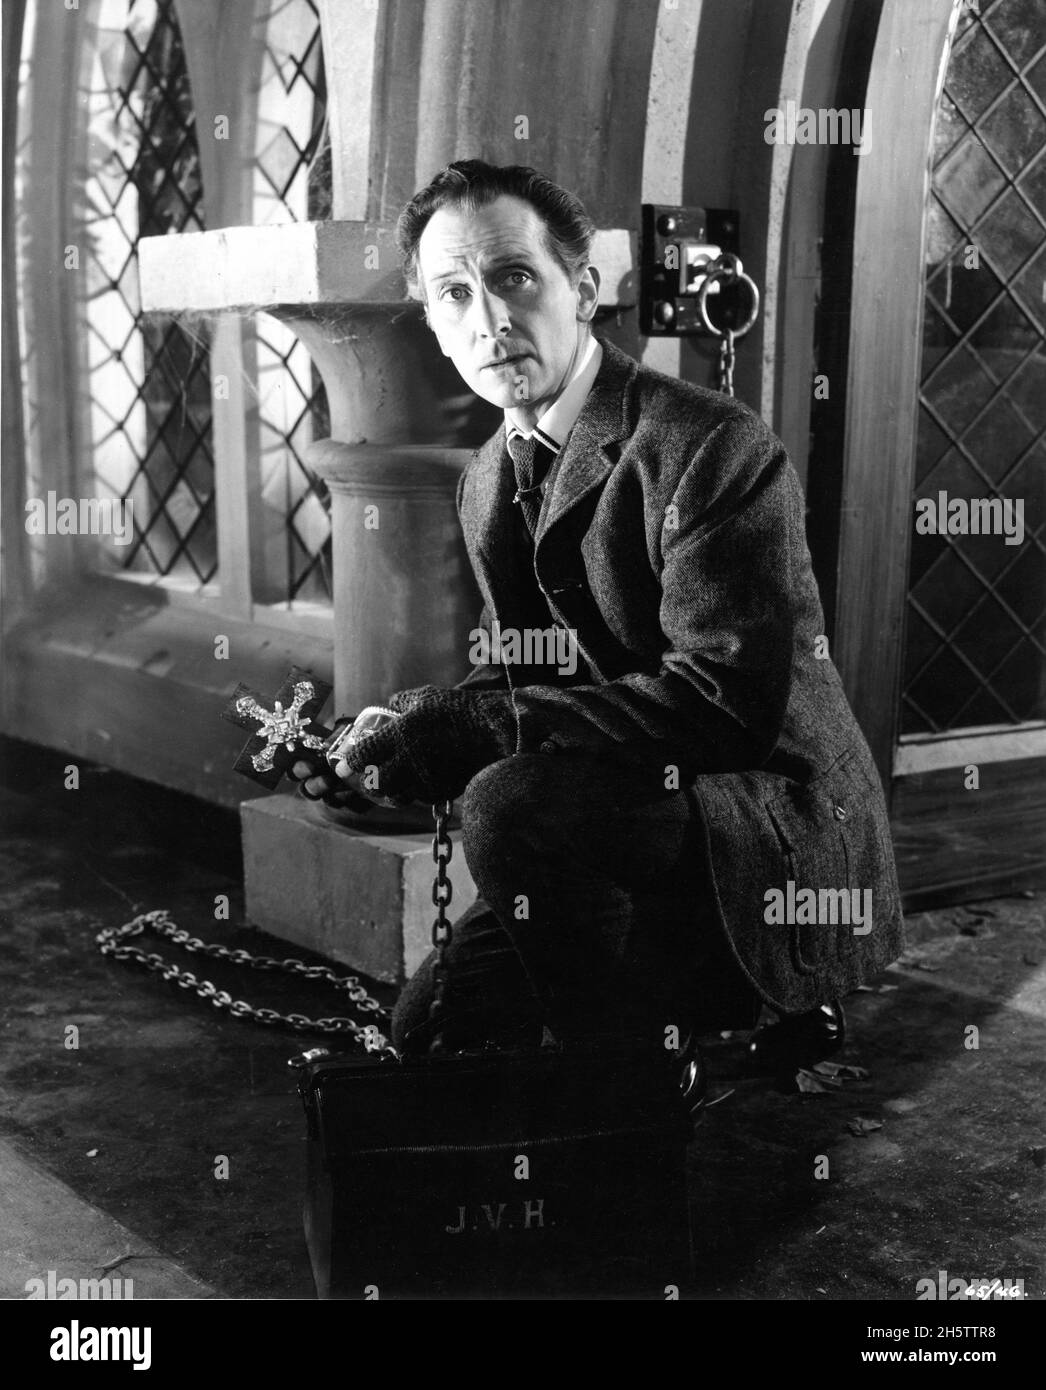 PETER CUSHING Portrait as Doctor / Professor Abraham Van Helsing in THE BRIDES OF DRACULA 1960 director TERENCE FISHER Hammer Films / Rank Film Distributors (UK) / Universal Pictures (US) Stock Photo